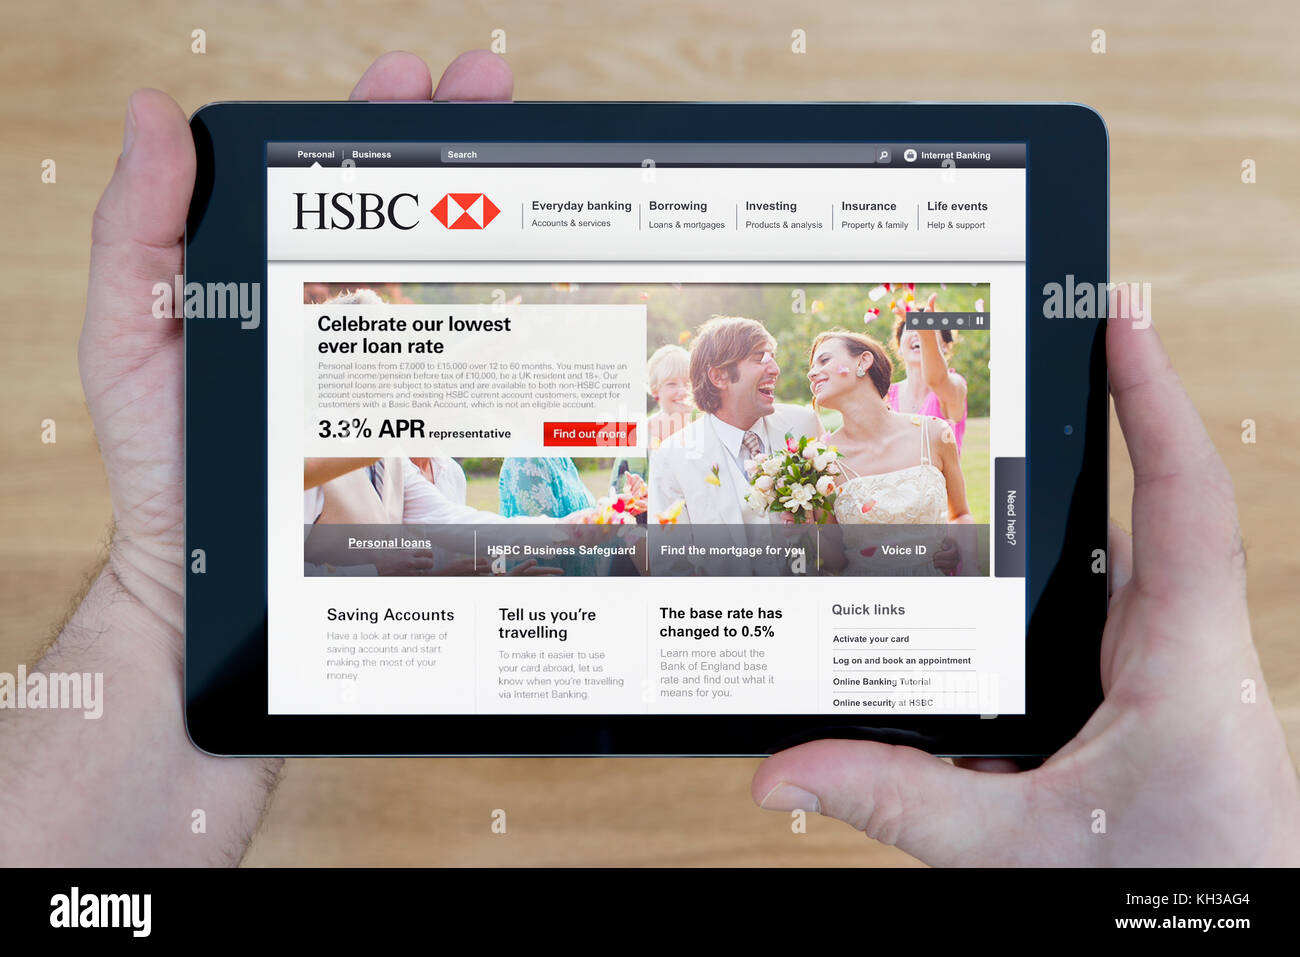 A man looks at the HSBC bank website on his iPad tablet device, shot against a wooden table top background (Editorial use only) Stock Photo